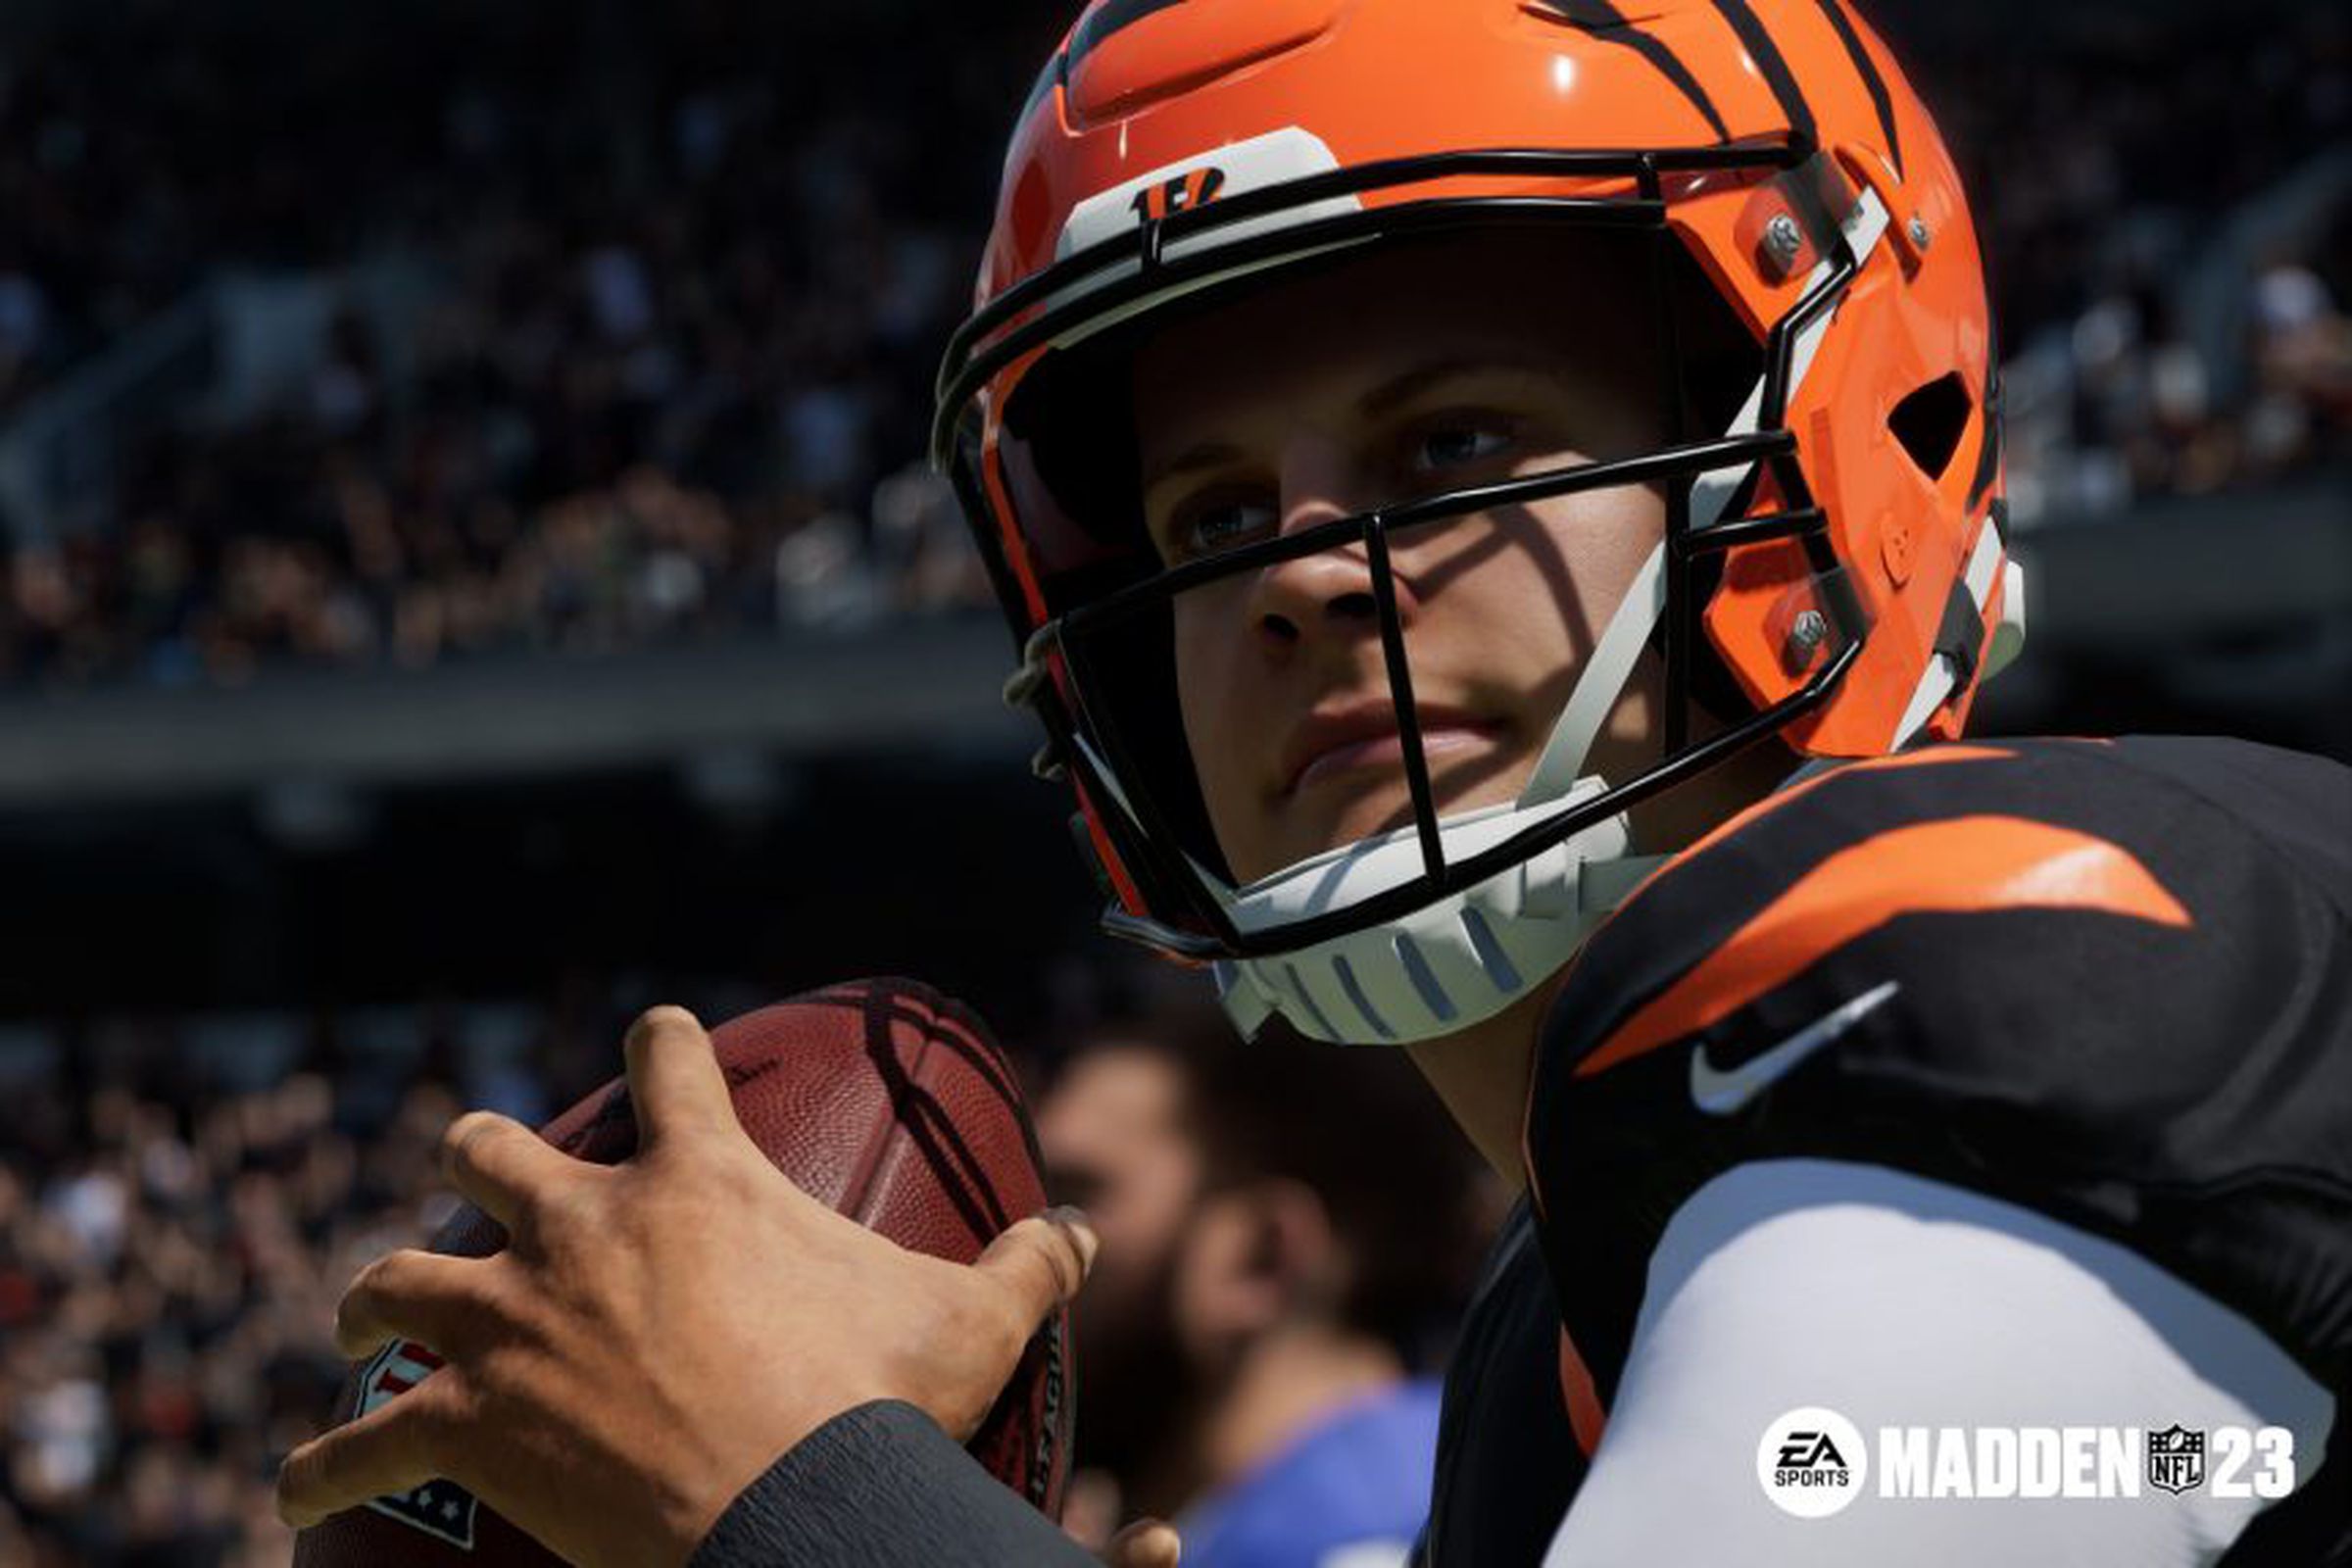 EA’s latest Madden NFL 23 fumble locked players out of the game